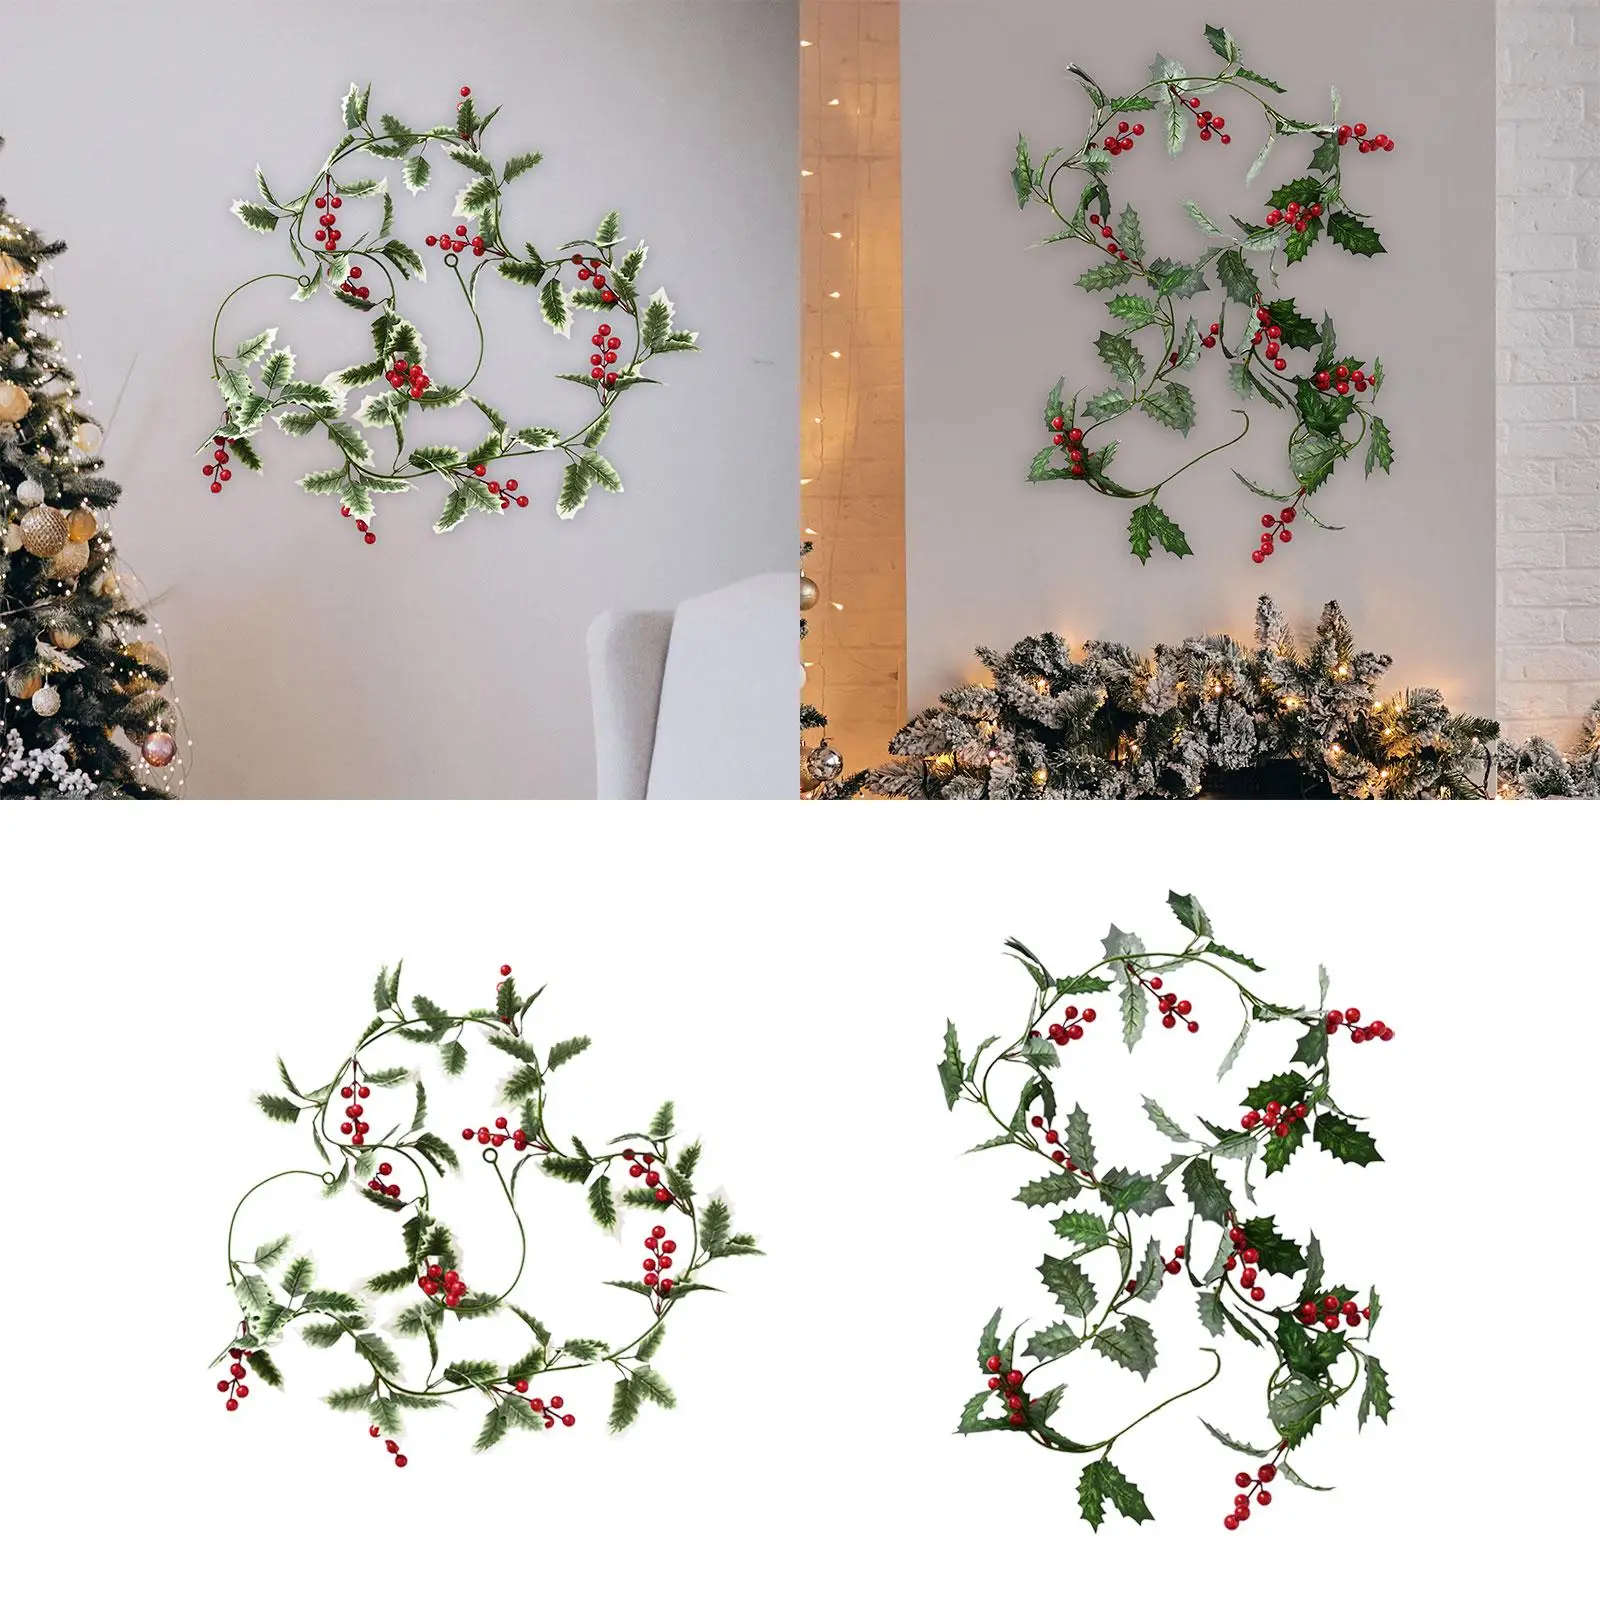 Artificial Christmas Vine Garland 2M Decor Green Leaf Wreaths Christmas Garland for Party Home Indoor Outdoor Holiday Decoration